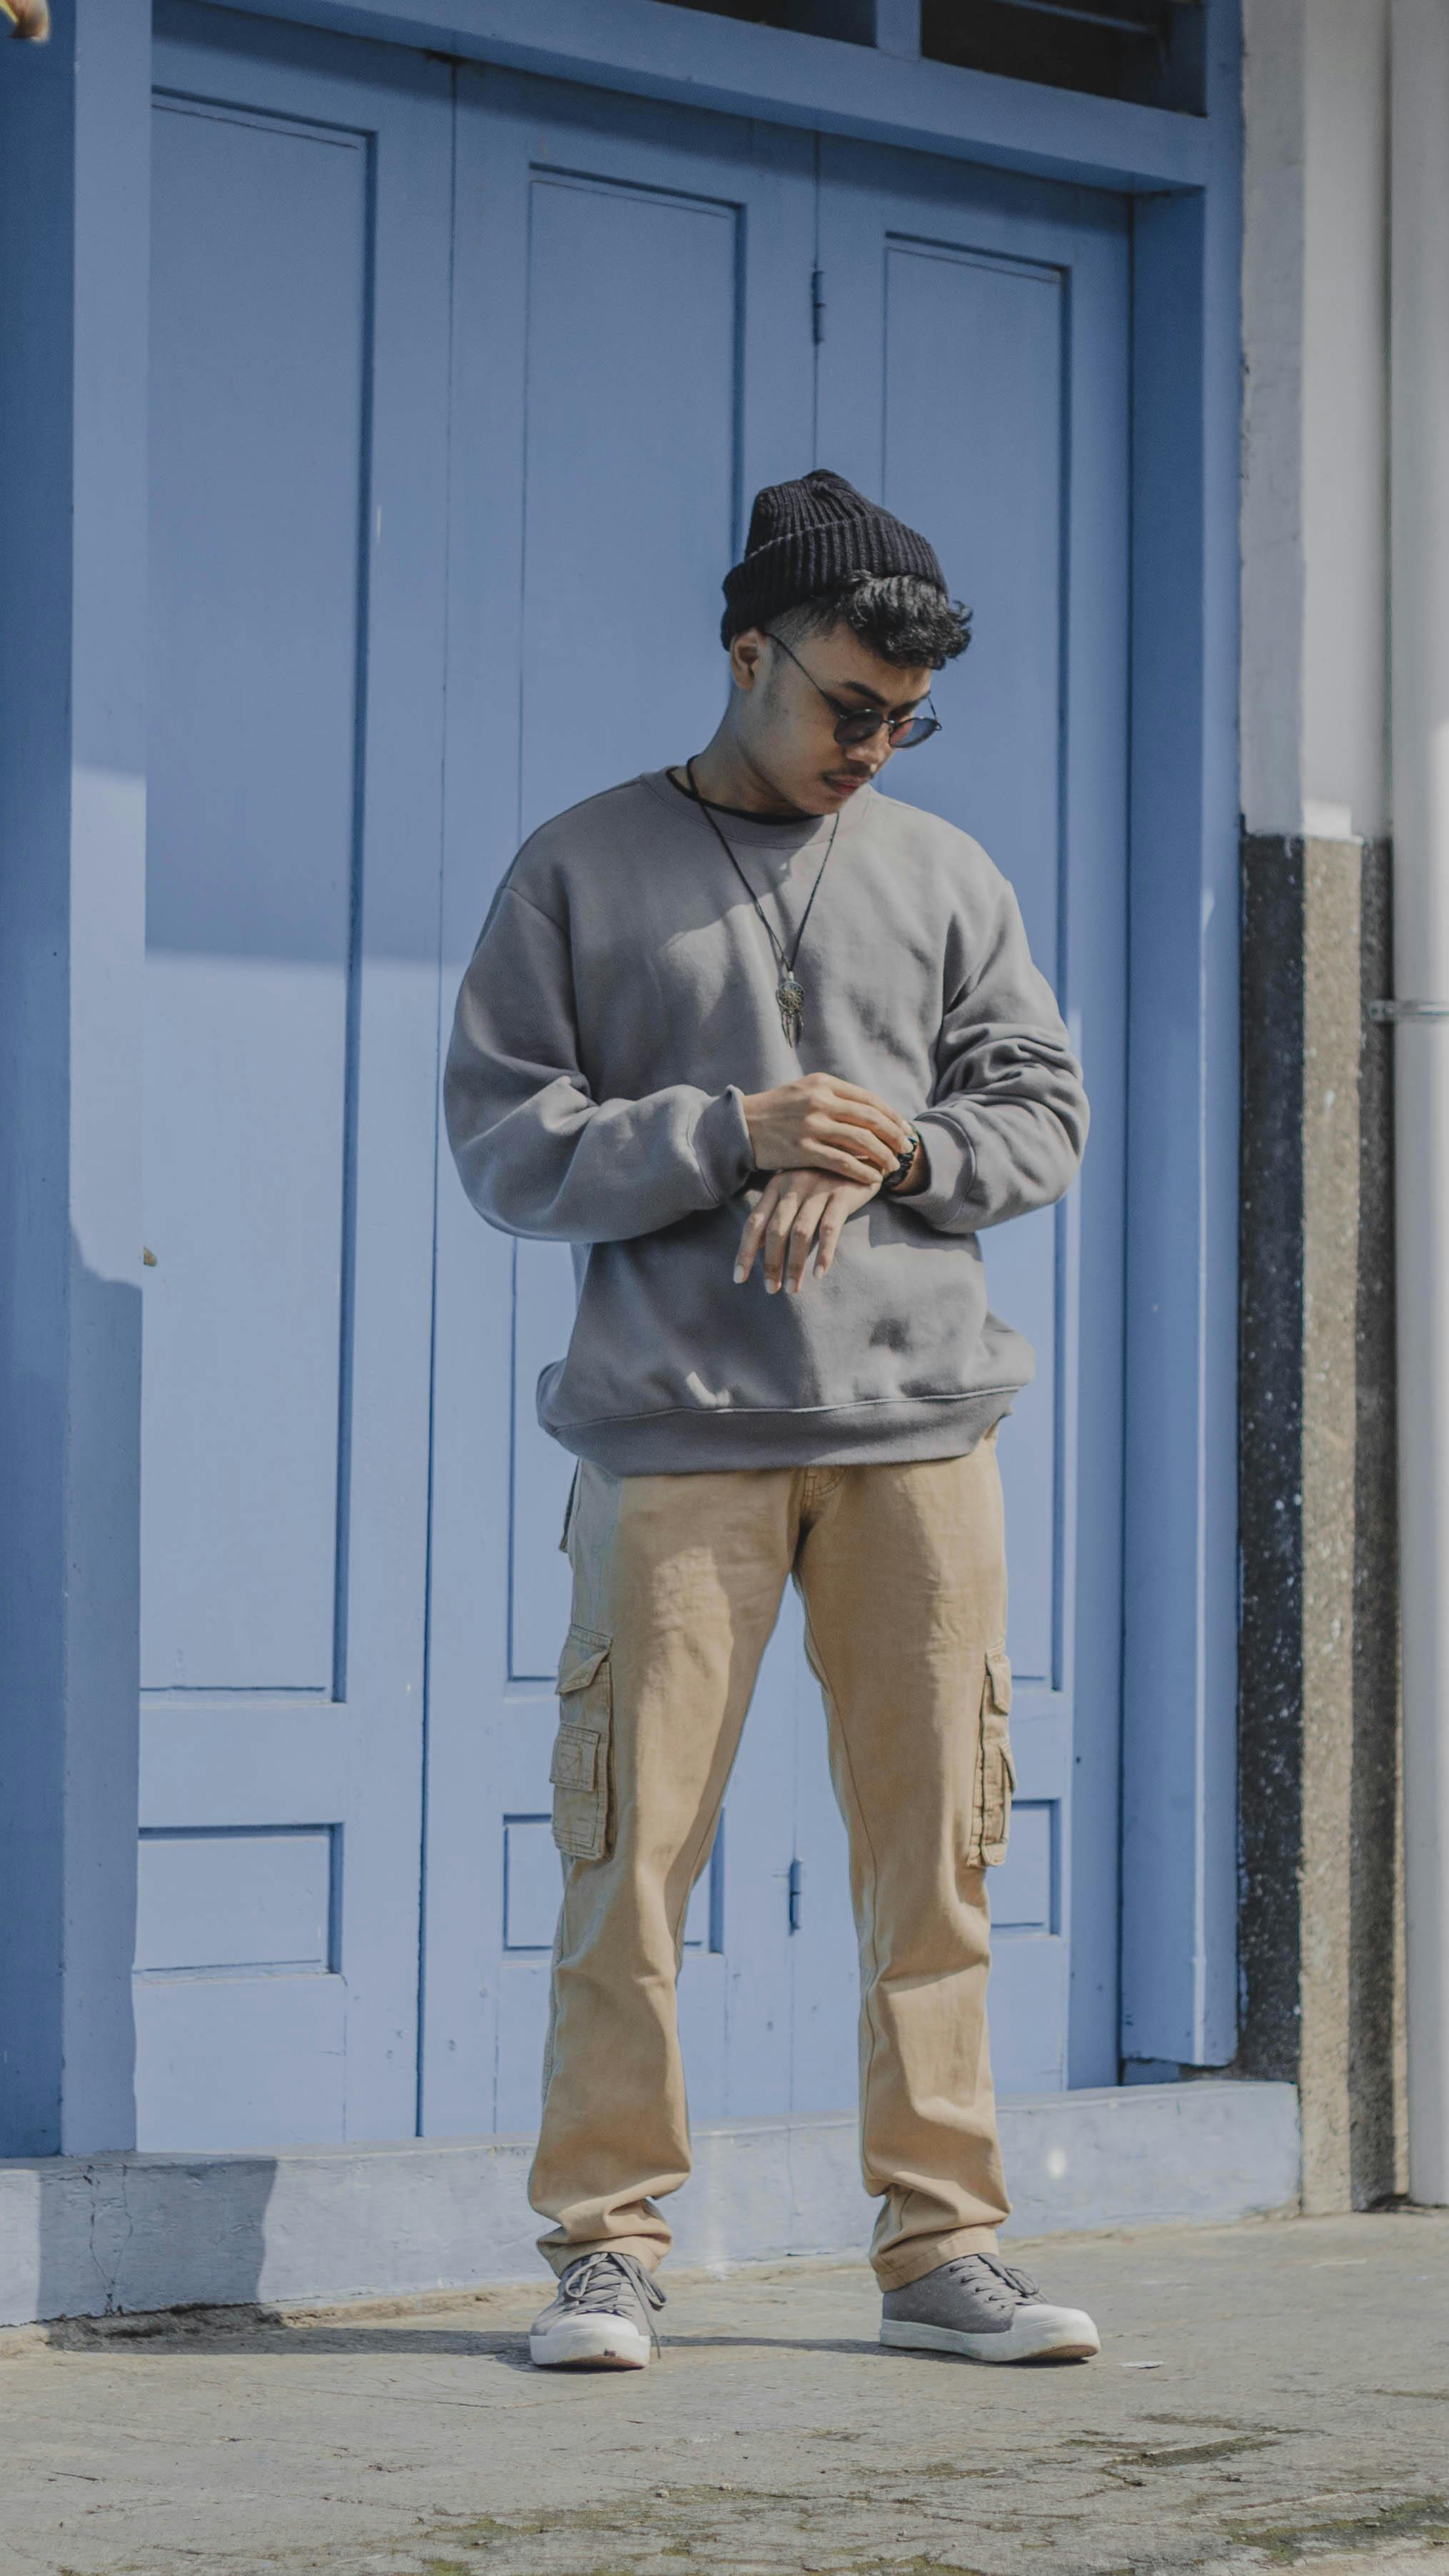 streetwear | Streetwear outfit men, Streetwear men outfits, Street style  outfits men